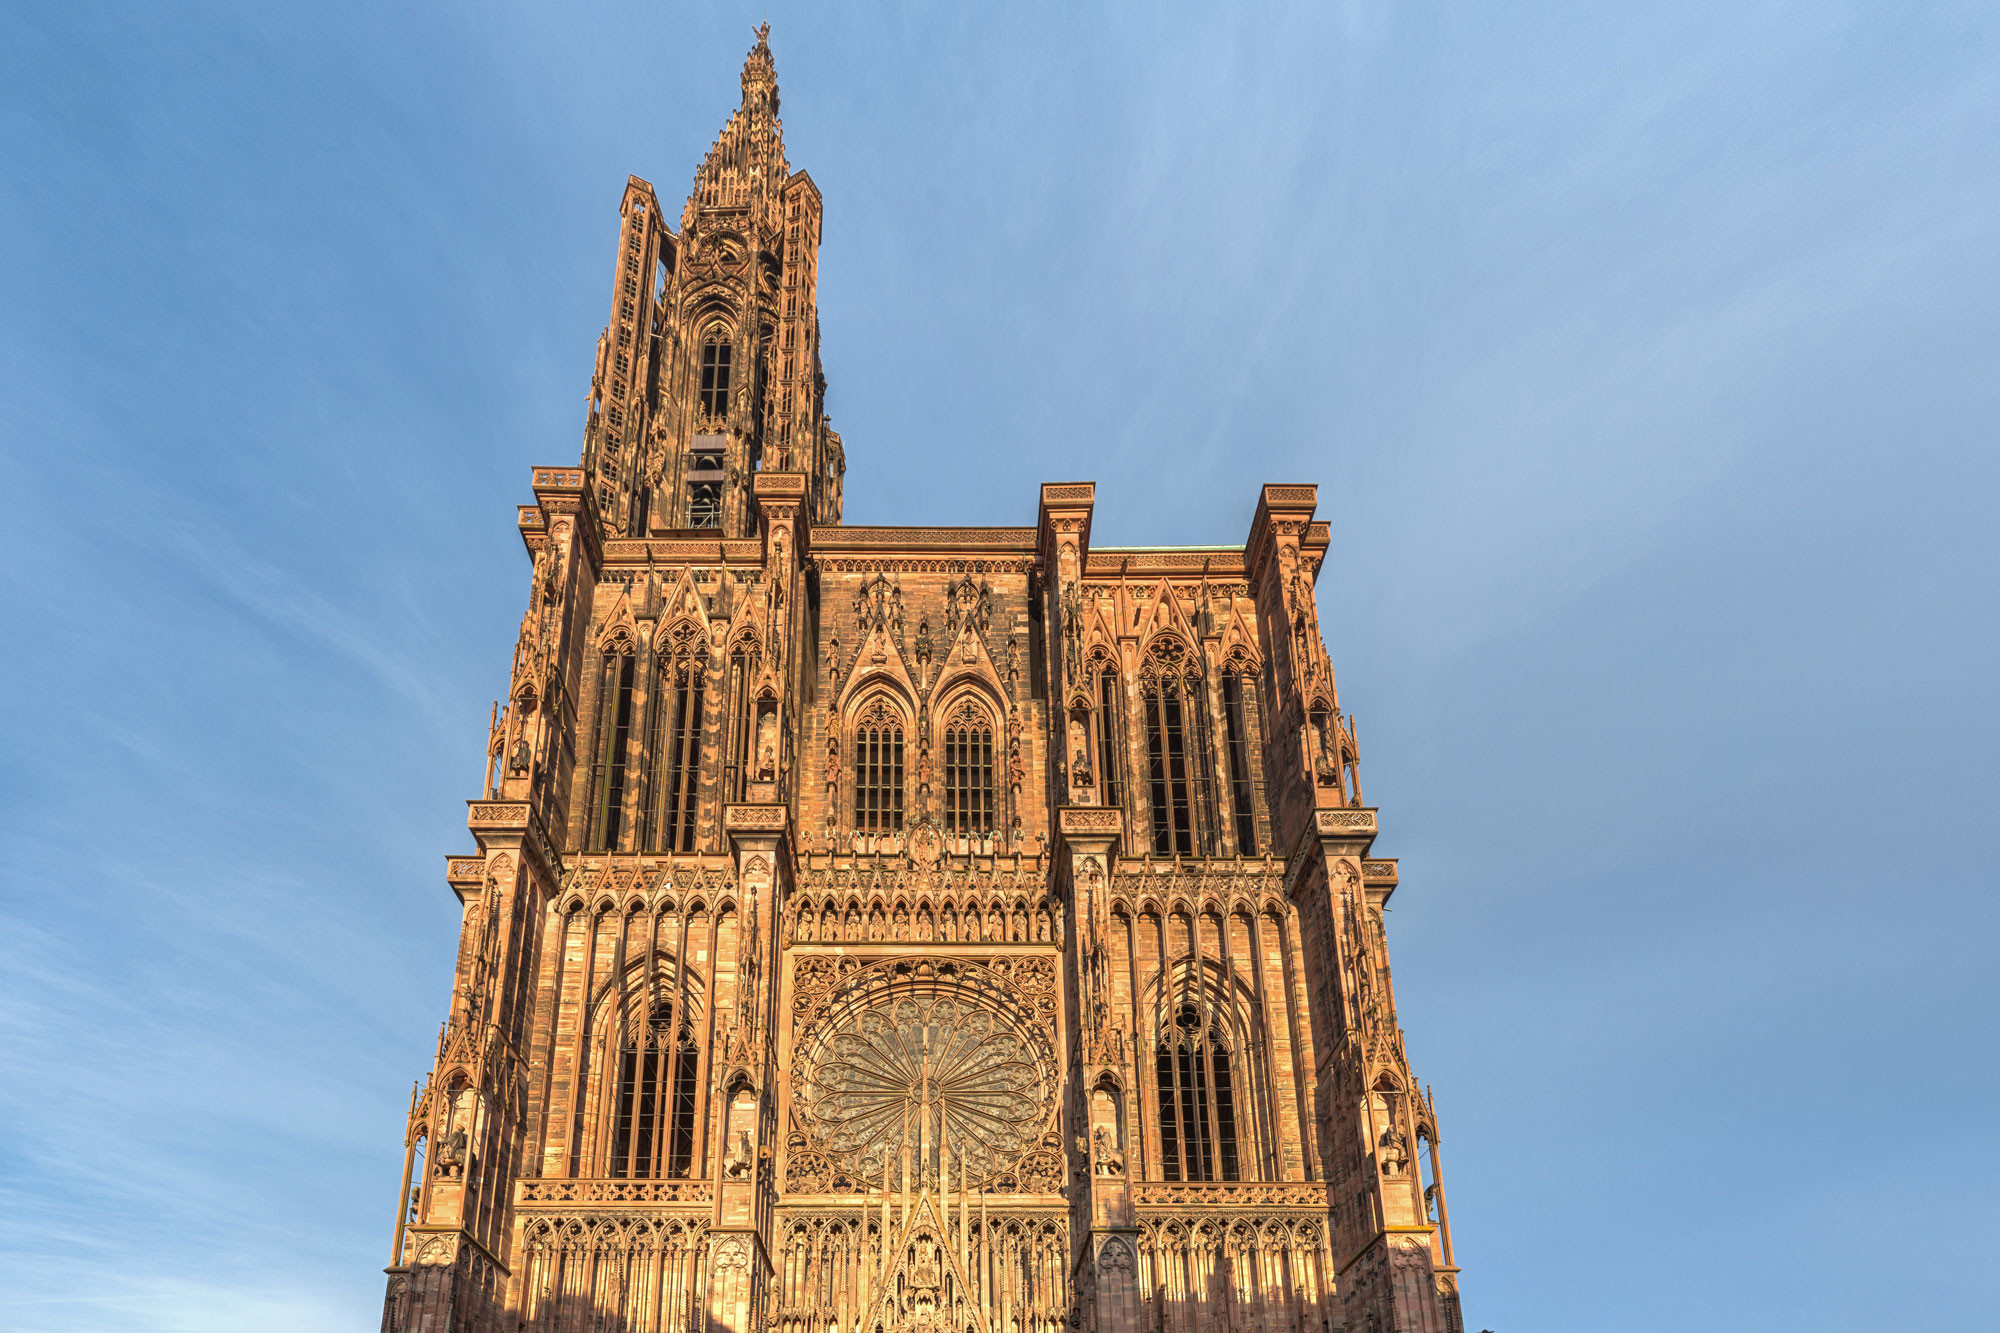 <p><a href="https://upload.wikimedia.org/wikipedia/commons/7/7e/Strasbourg_Cathedral_Exterior_-_Diliff.jpg" target="_self">wikipedia.org</a></p>
